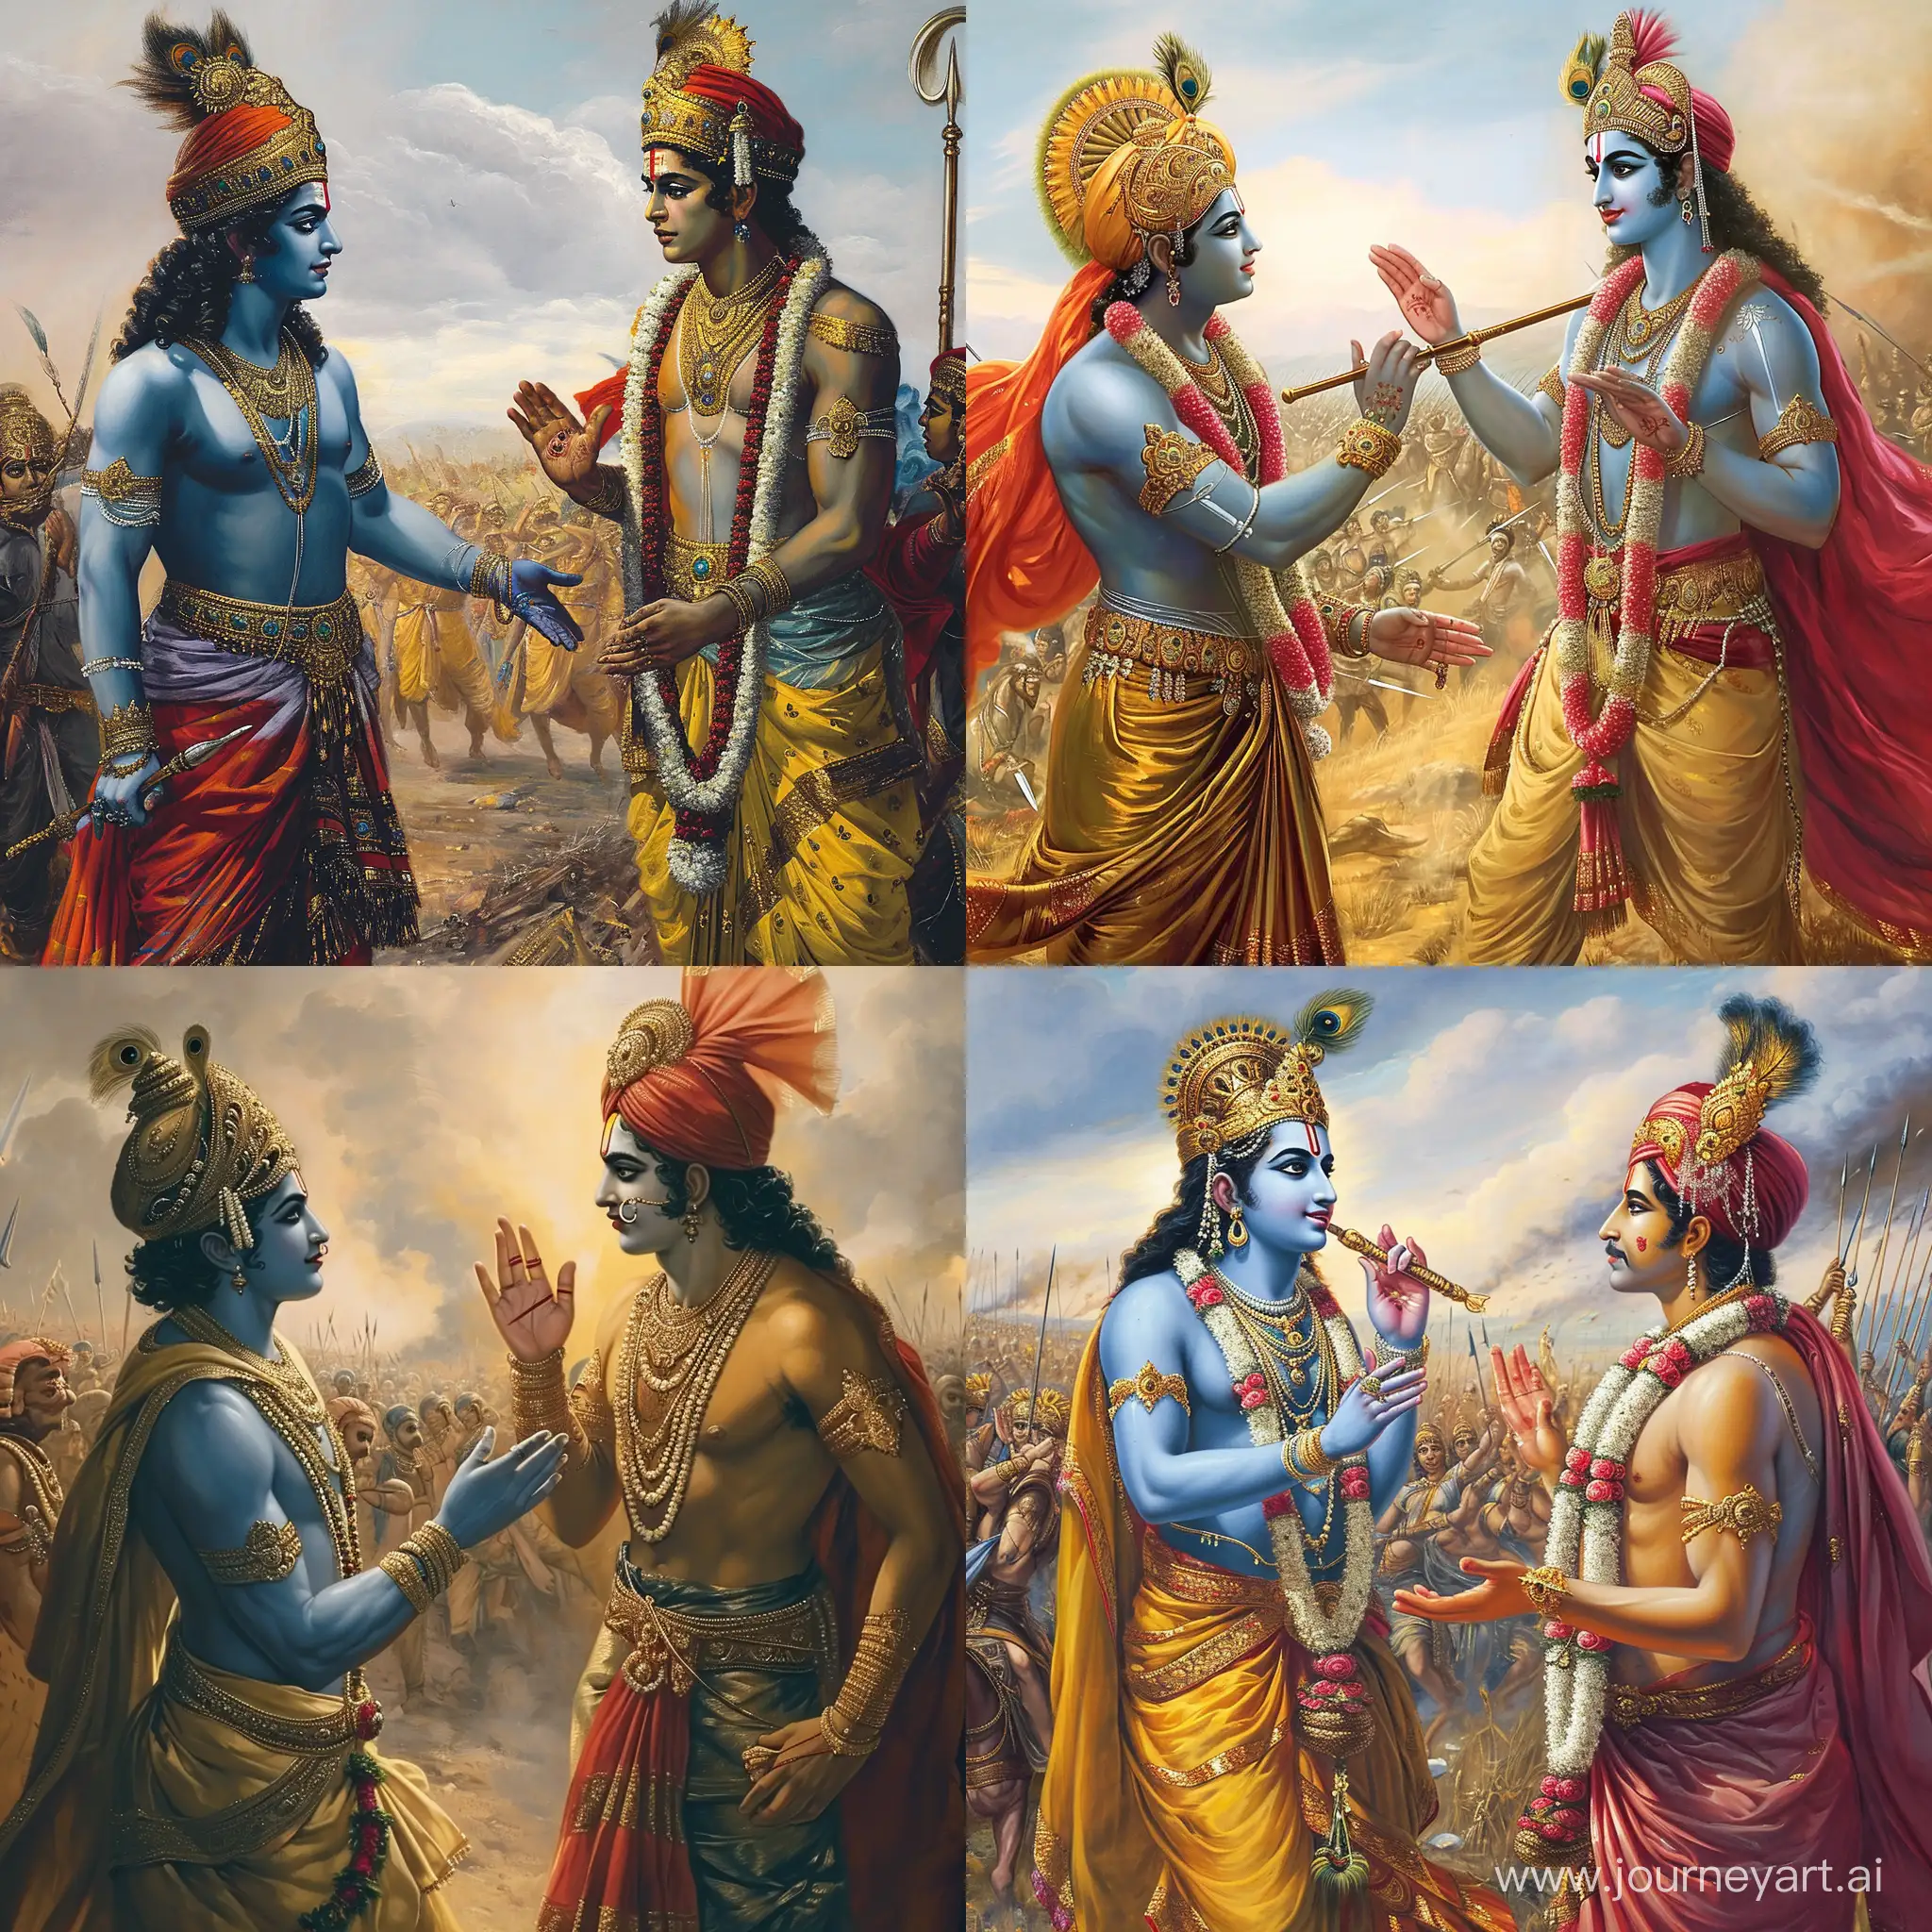 Anime style image of krishna in his pure form talking to arjuna in battlefield